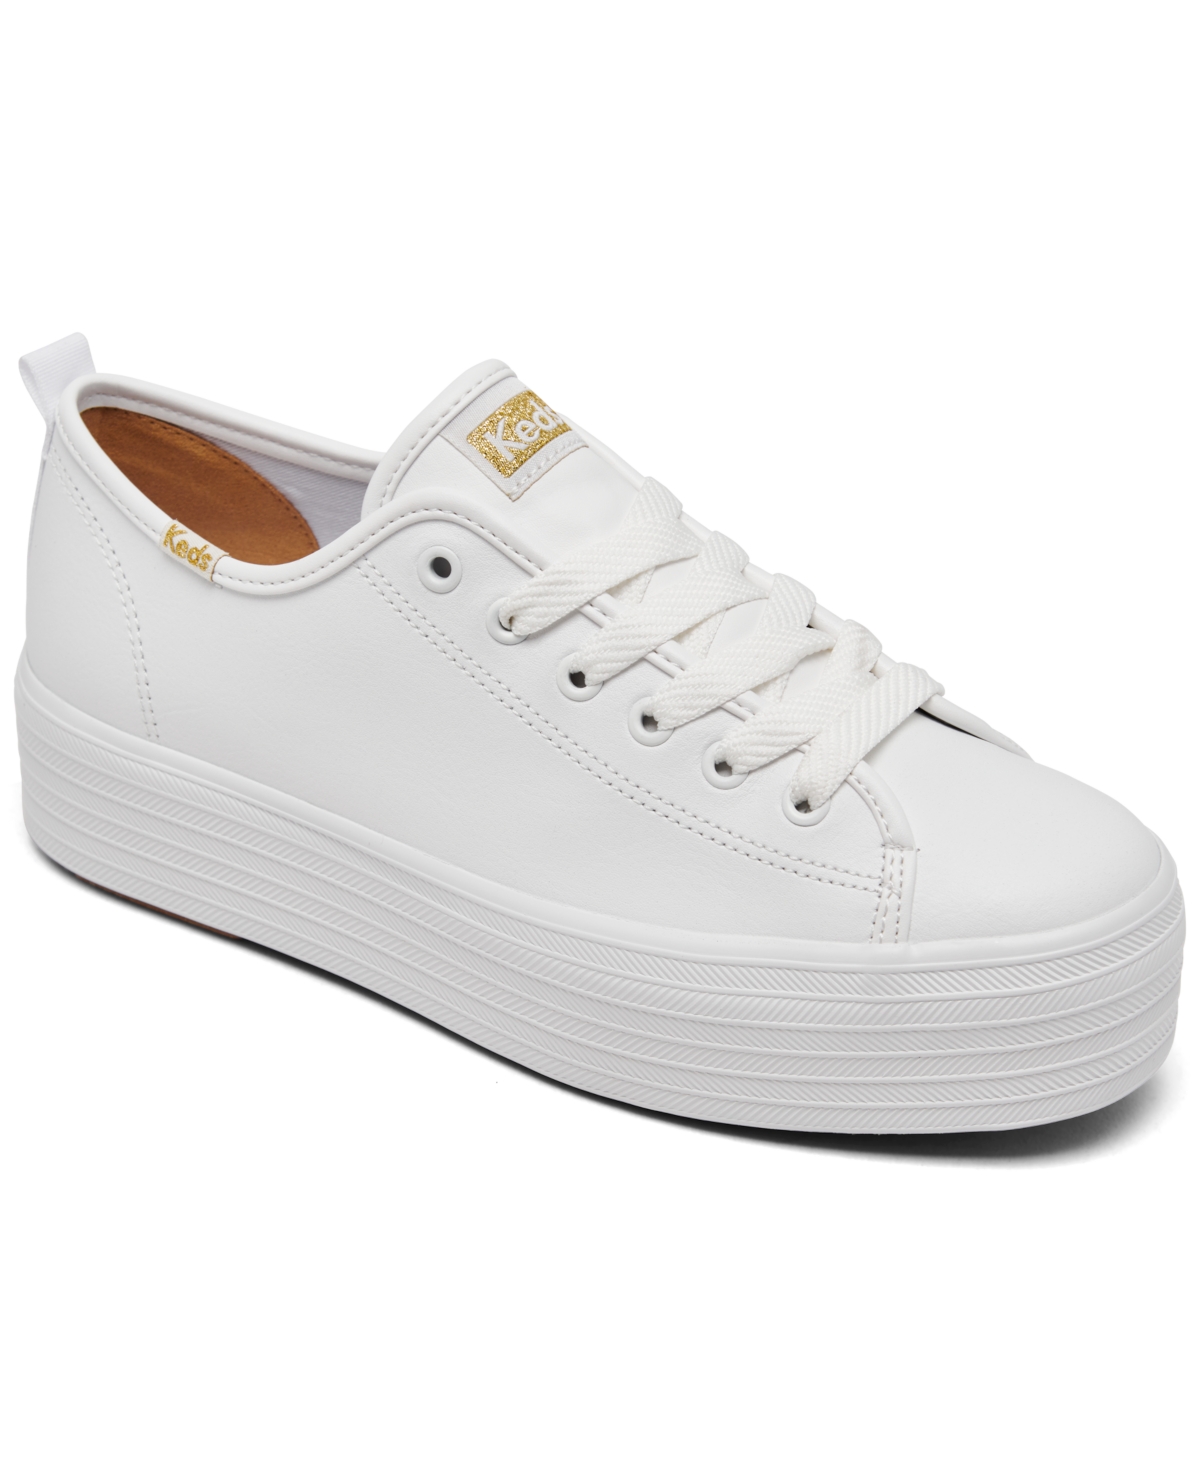 Women's Triple Up Leather Platform Casual Sneakers from Finish Line - White